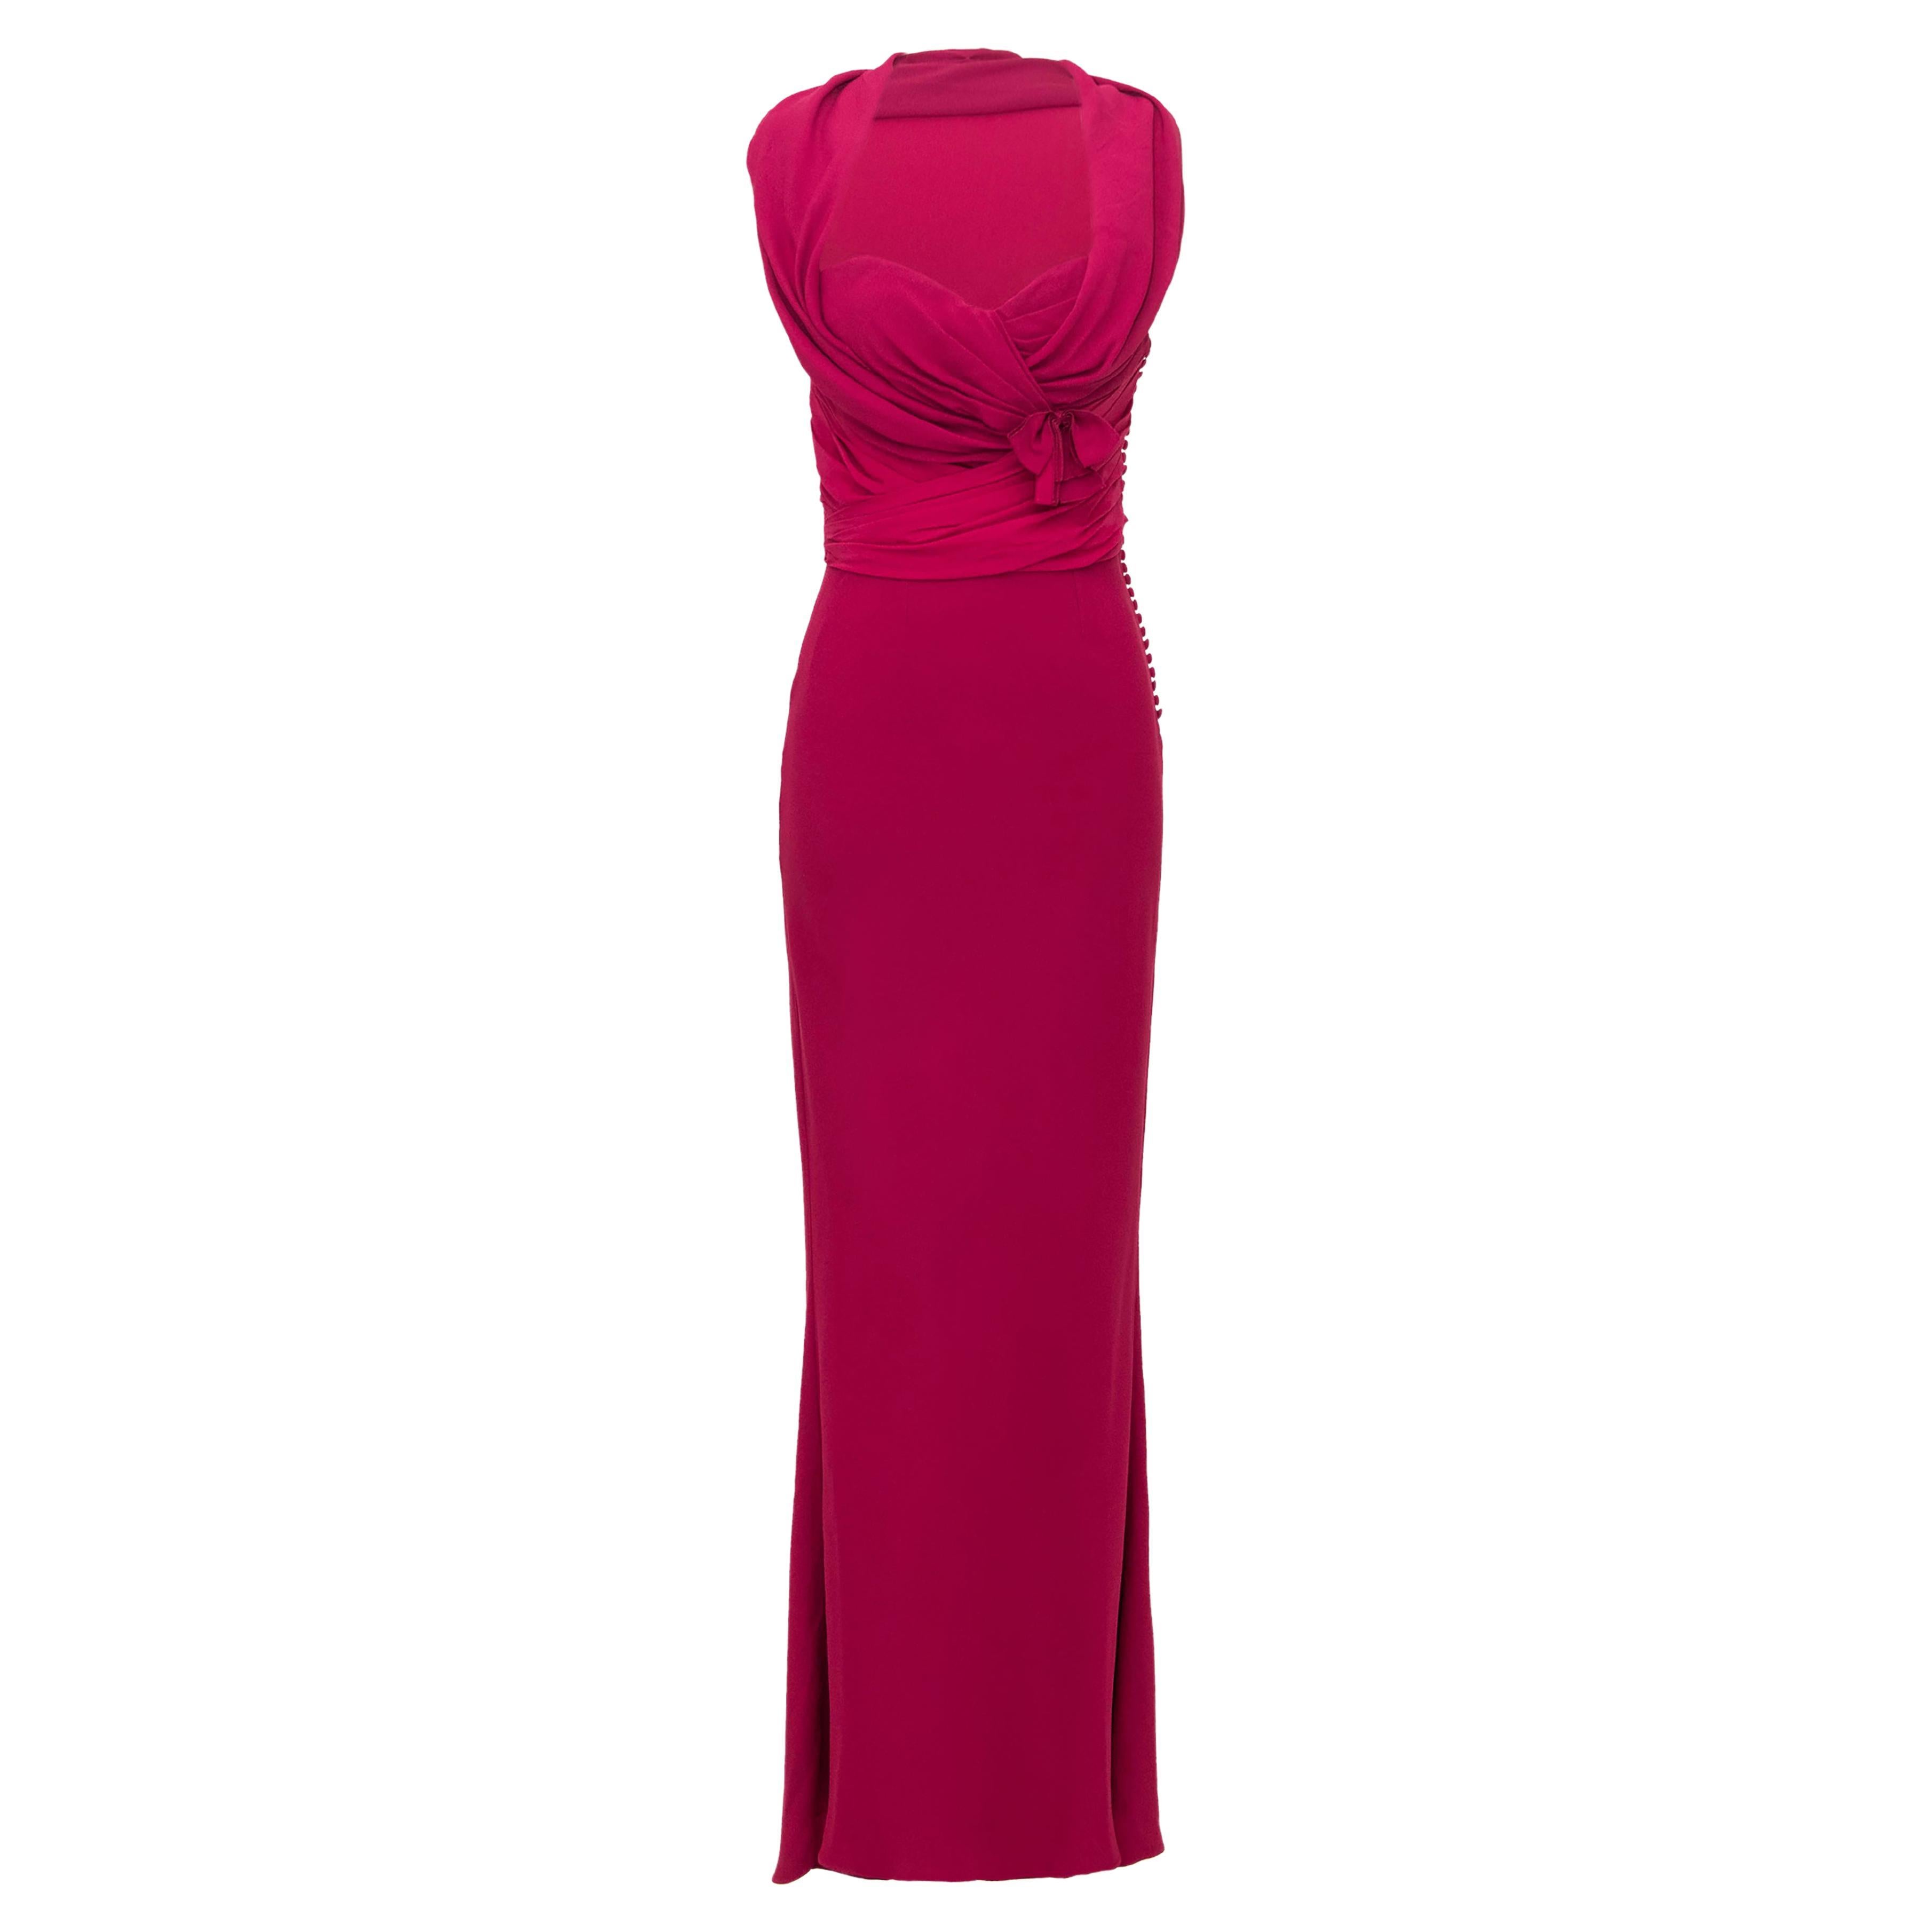 1990s Christian Dior Deep Fuchsia Pink Crepe Gown